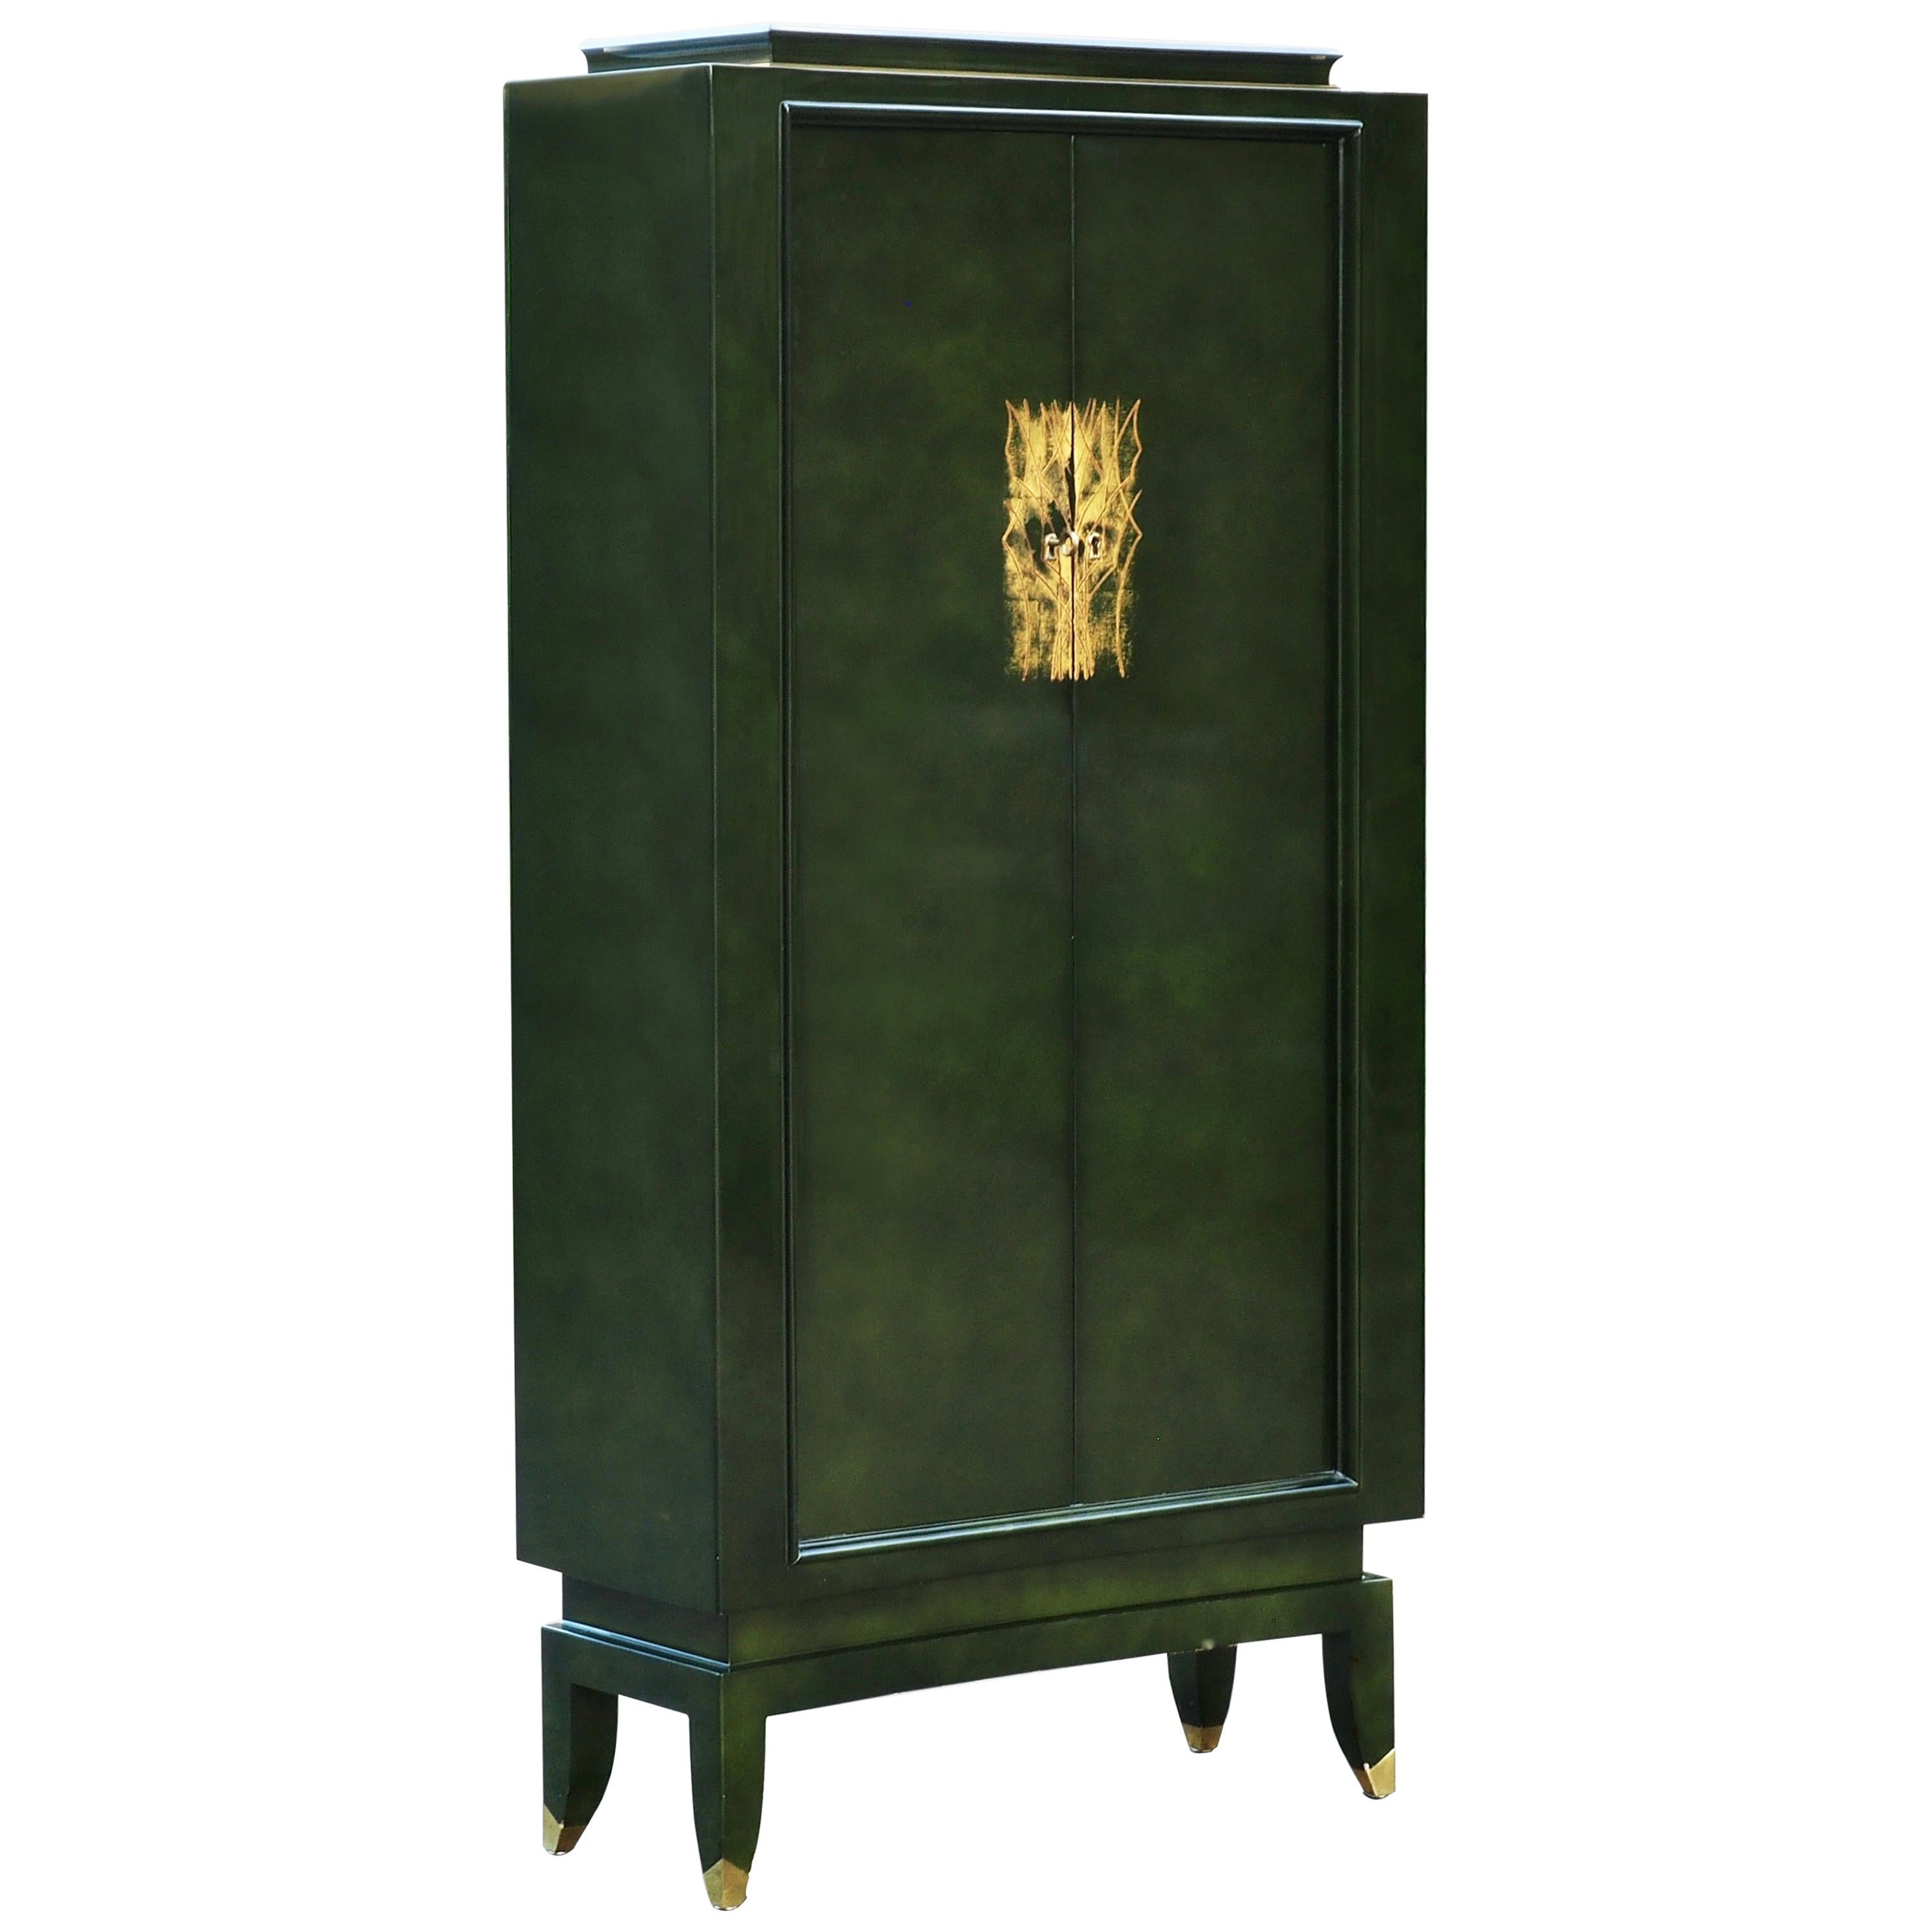 Green Lacquer Cabinet by Andre Domin & Marcel Genevriere for Maison Dominique